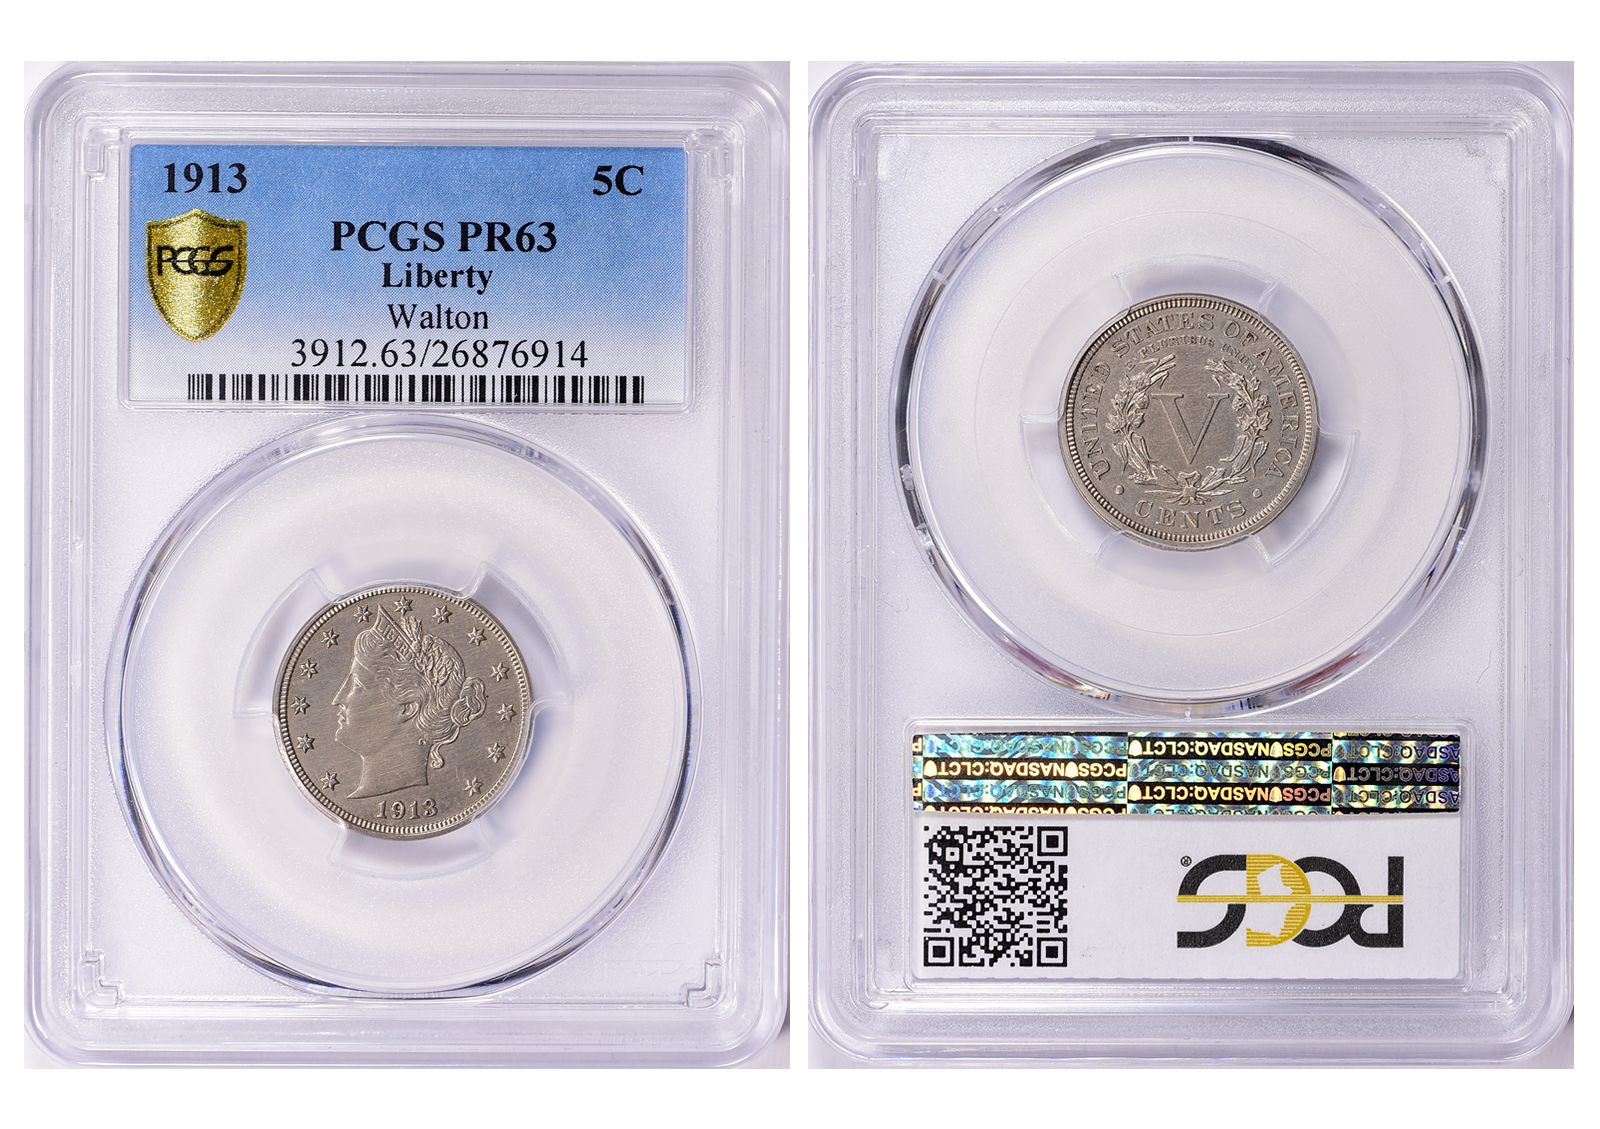 GreatCollections Acquires 1913 Nickel for $4.2 Million | CoinNews